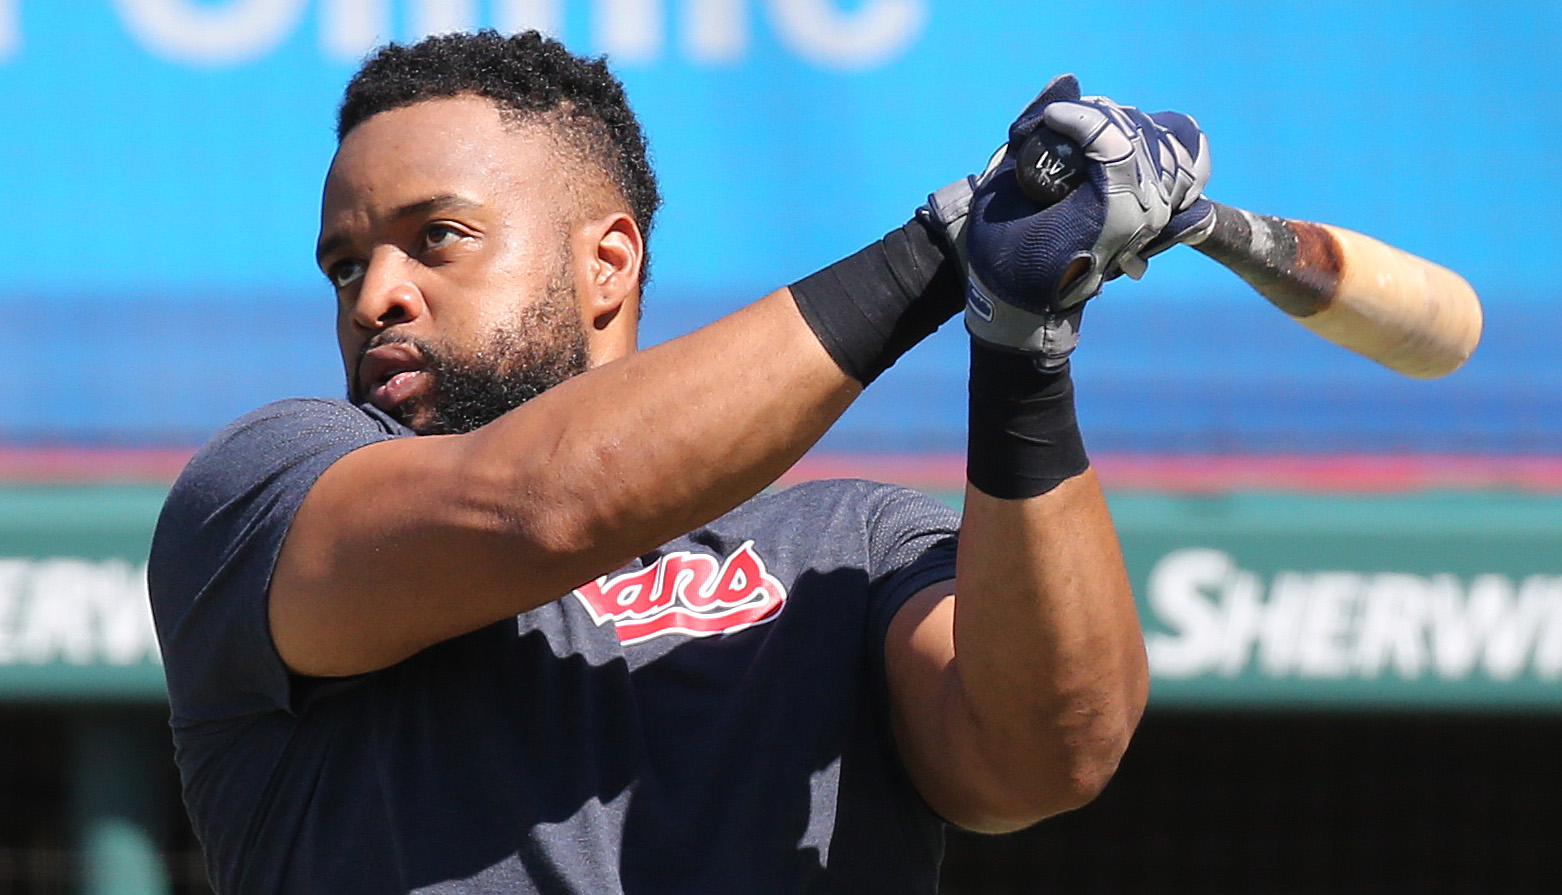 Cleveland Indians welcome Carlos Santana back with hugs and cheers